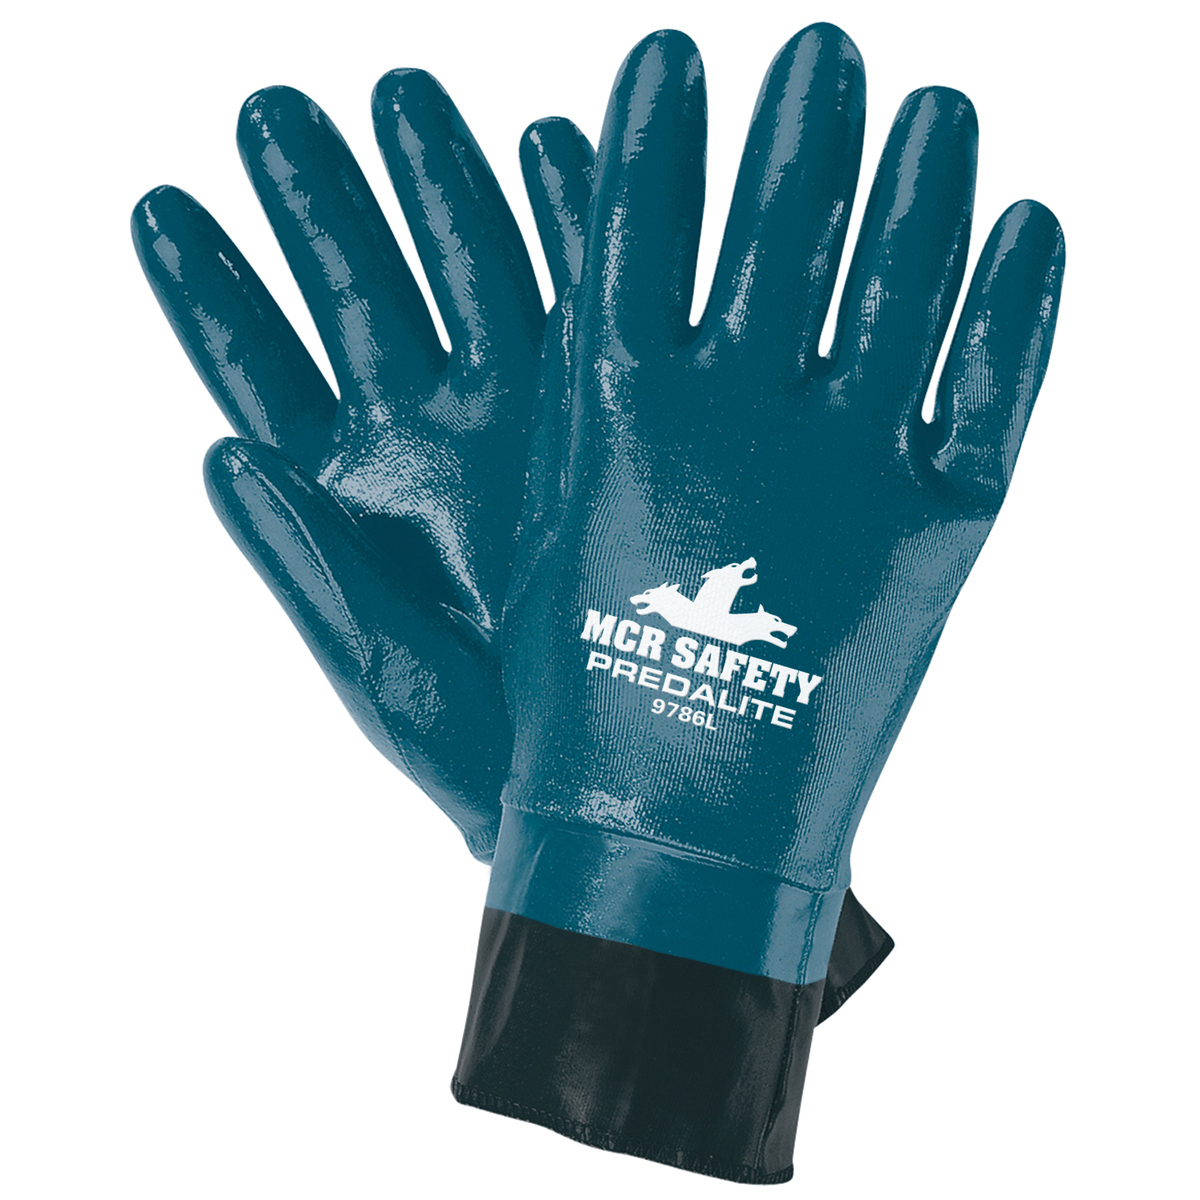 MCR Safety® Medium Predalite® Blue Light Nitrile Full Dip Coating Work Gloves With Natural Interlock Liner And PVC Safety Cuff